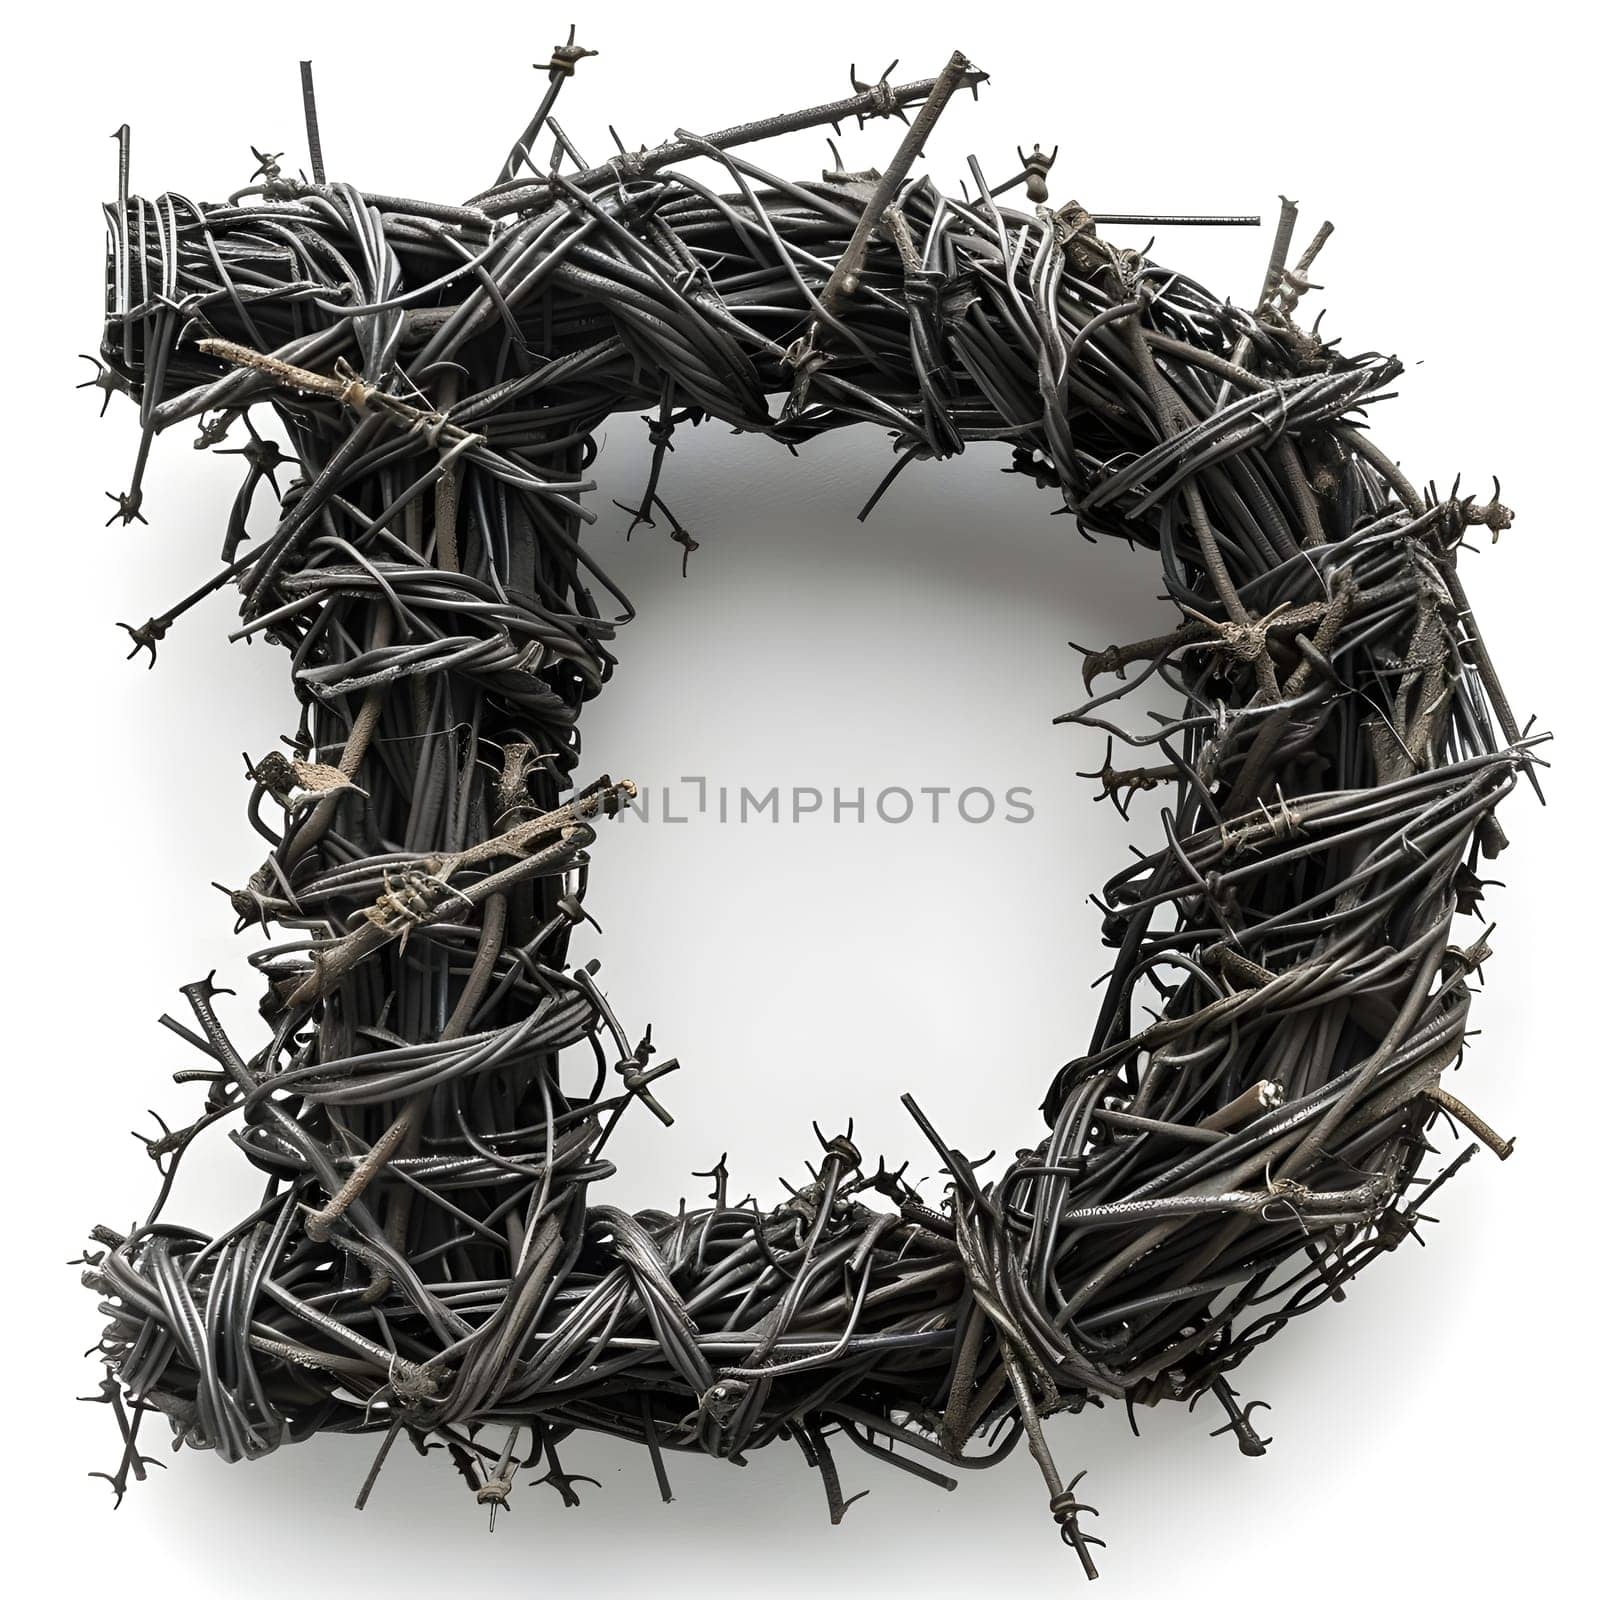 Twig wreath on white background shaped in the letter d, made of barbed wire by Nadtochiy